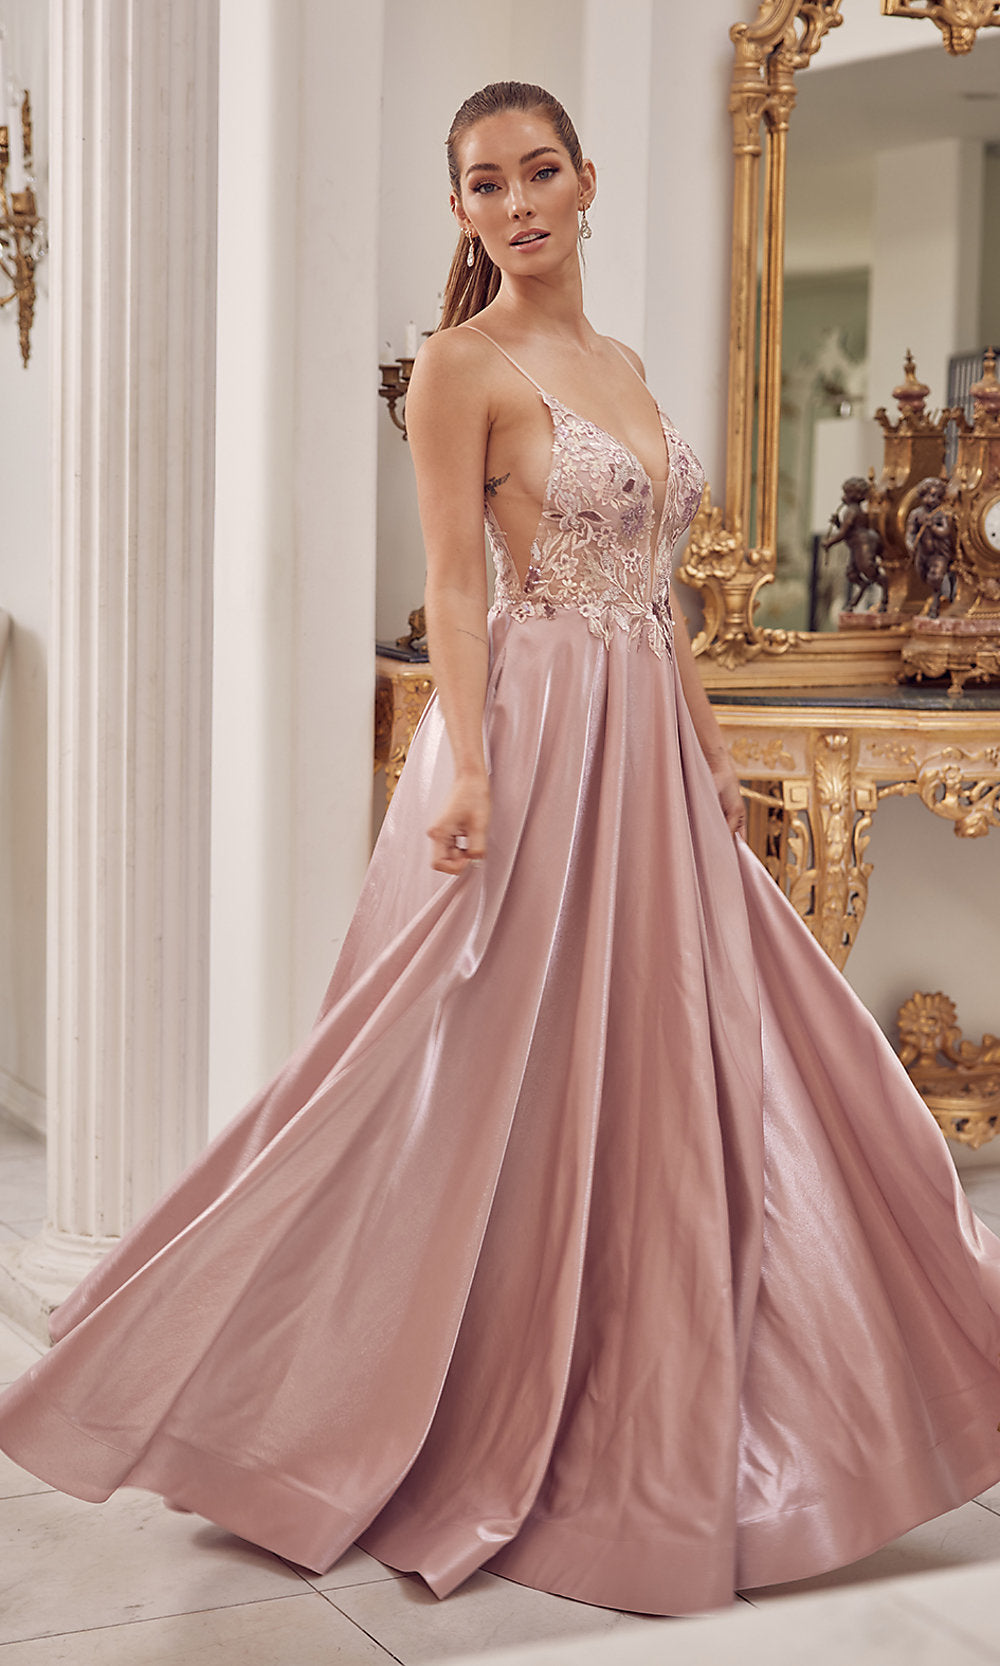 Pink Tulle A-line Scoop Lace Prom Dress With Train MP717 | Musebridals